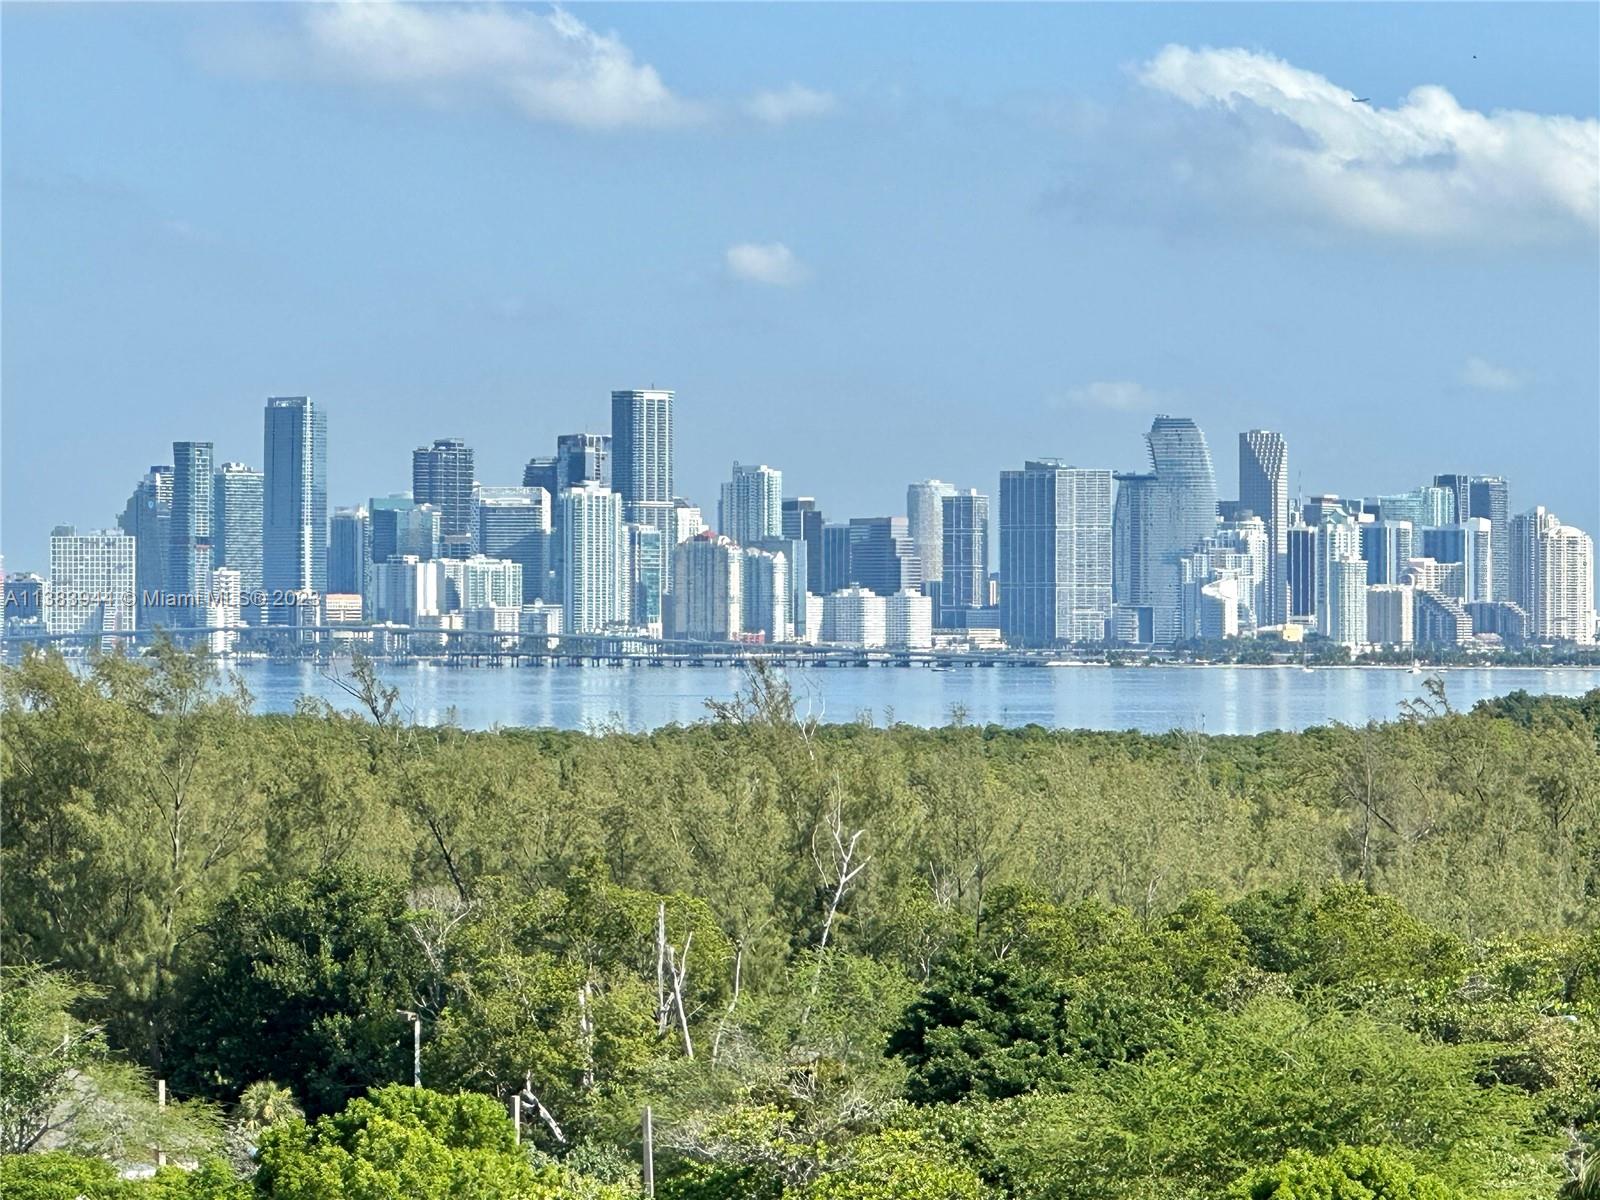 Fully remodeled unit with best views on Key Biscayne. Available mid May until mid October. Washer dyer in common areas same floor.